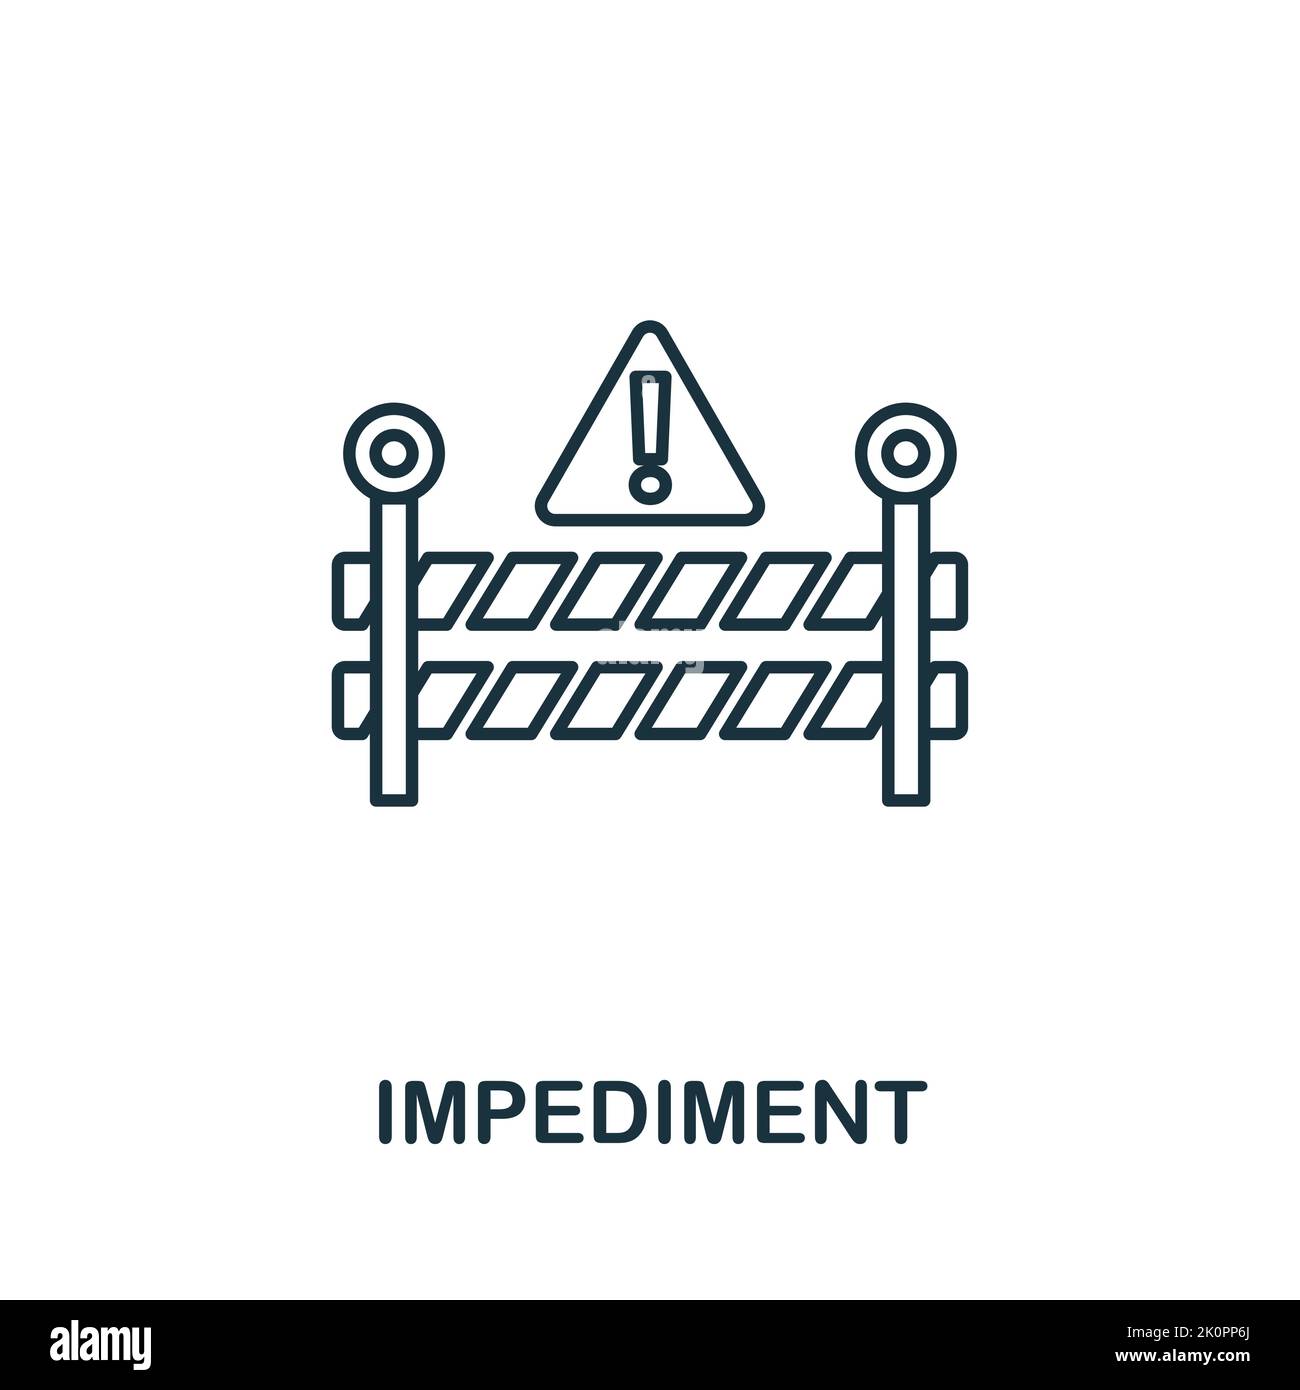 Impediment icon. Creative element sign from agile method collection. Monochrome Impediment icon for templates, infographics and more. Stock Vector